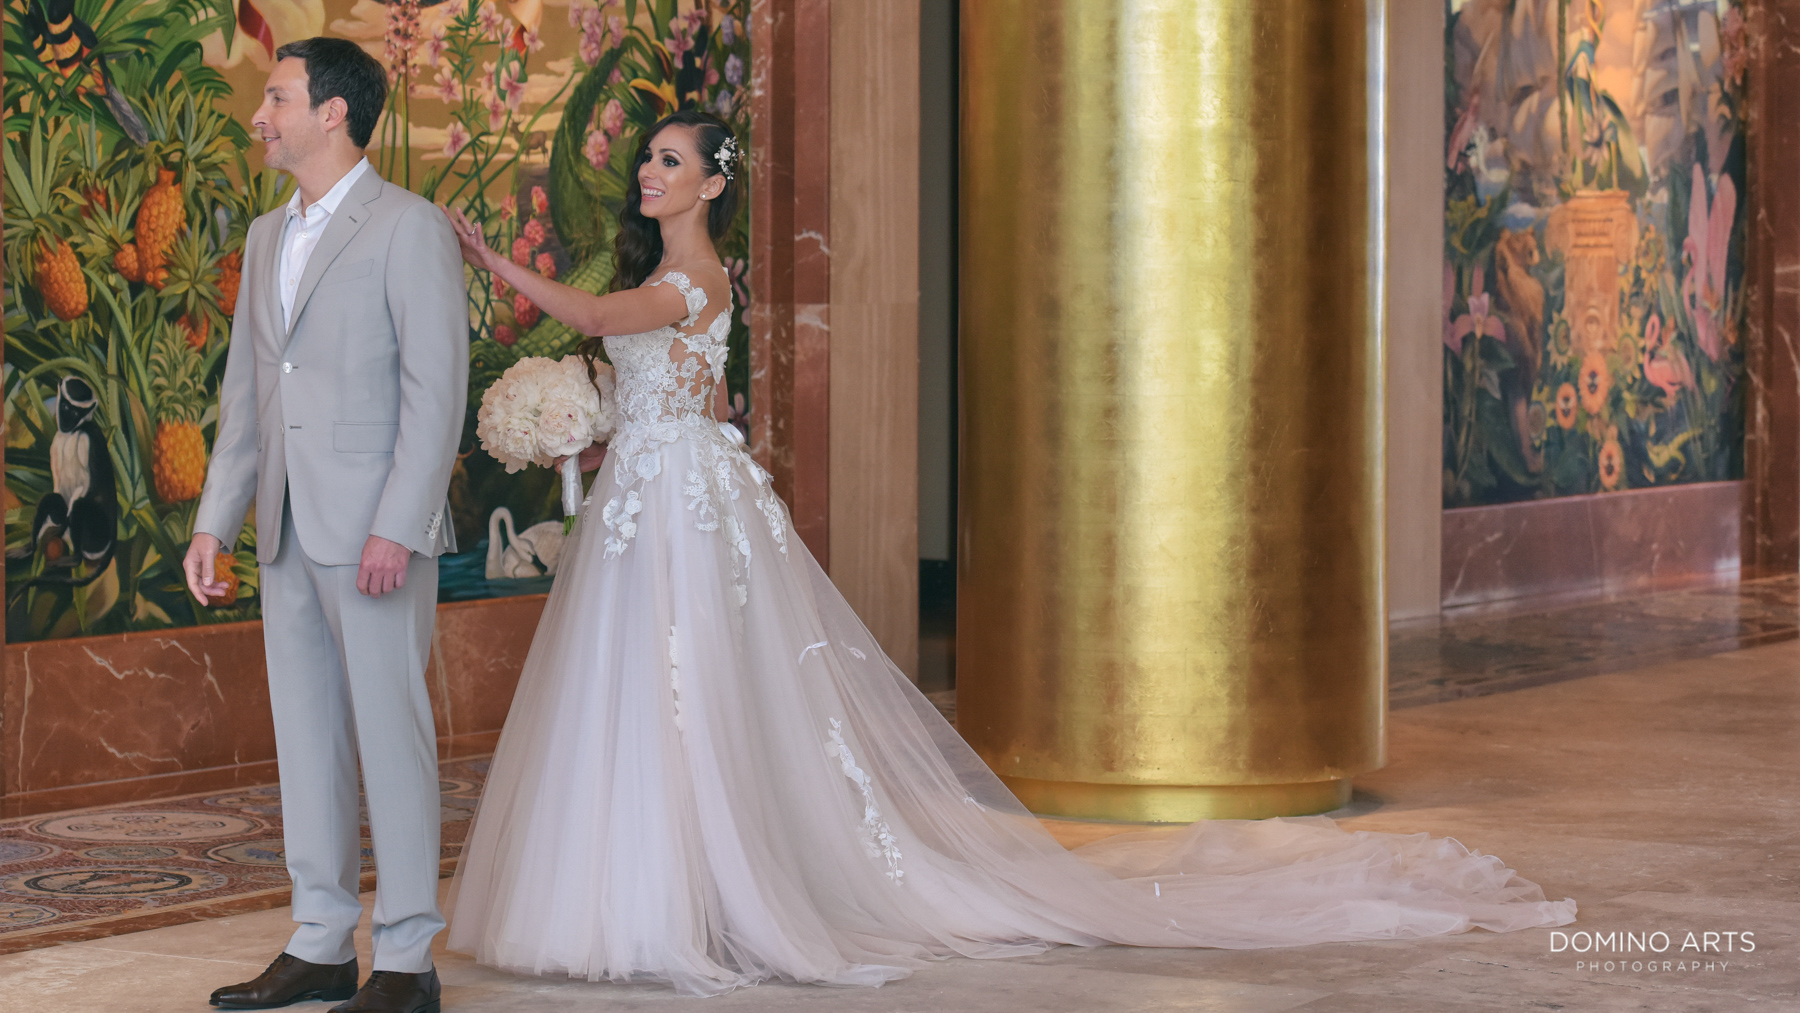 First look fun pictures at Luxury Destination Beach Wedding Photography at Faena Hotel